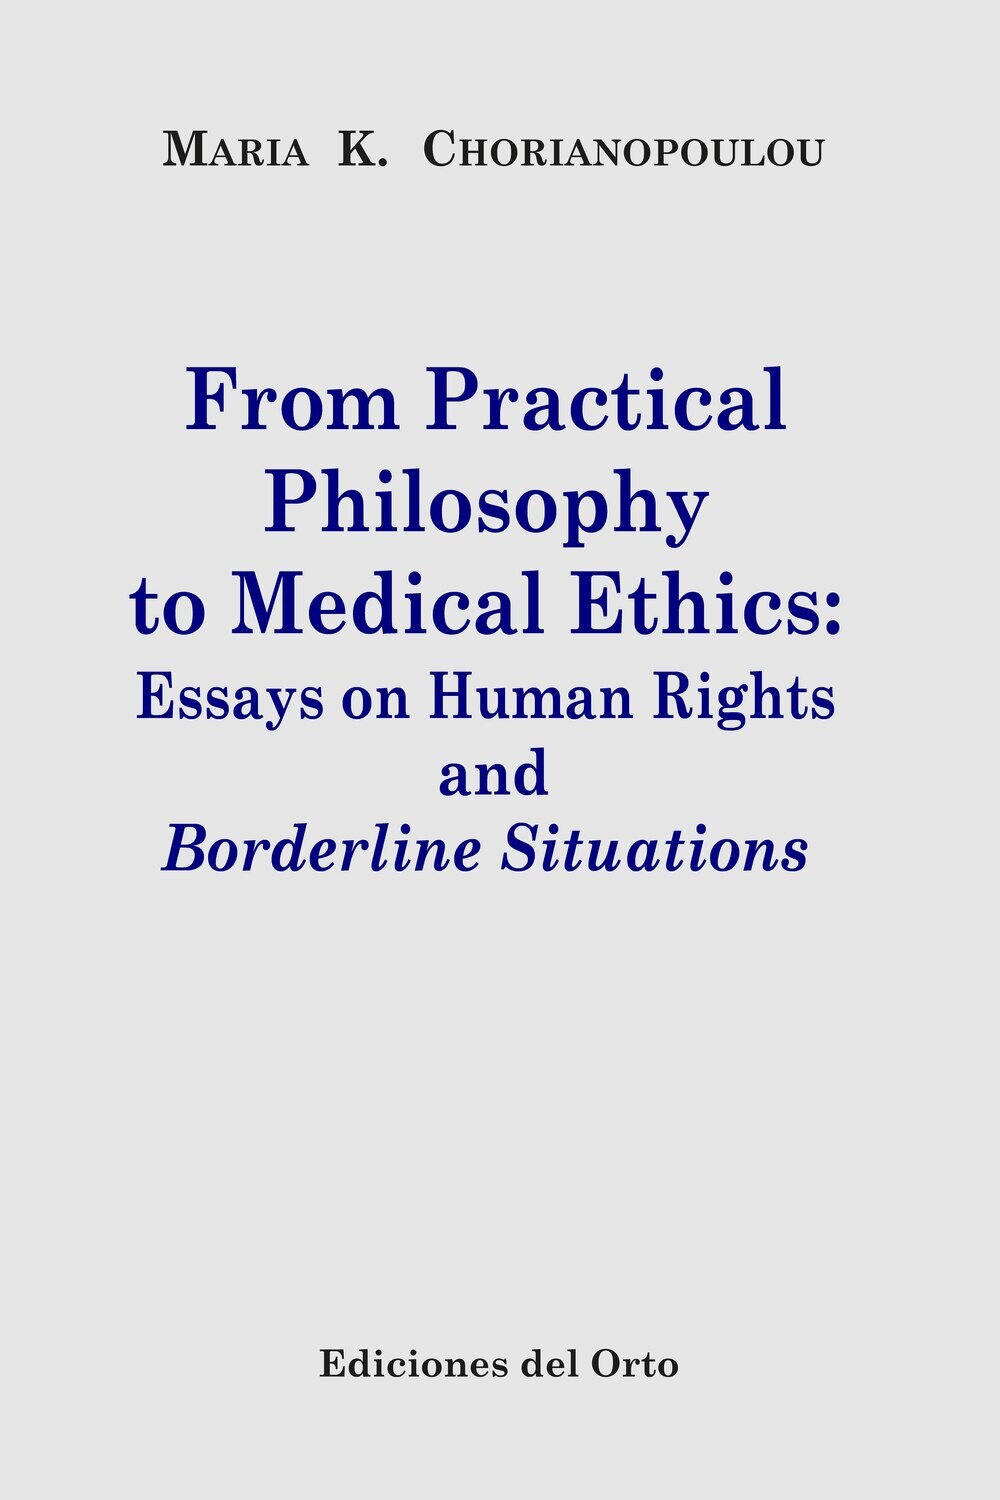 FROM PRACTICAL PHILOSOPHY TO MEDICAL ETHICS: ESSAYS ON HUMAN RIGHTS AND BORDERLINE SITUATIONS